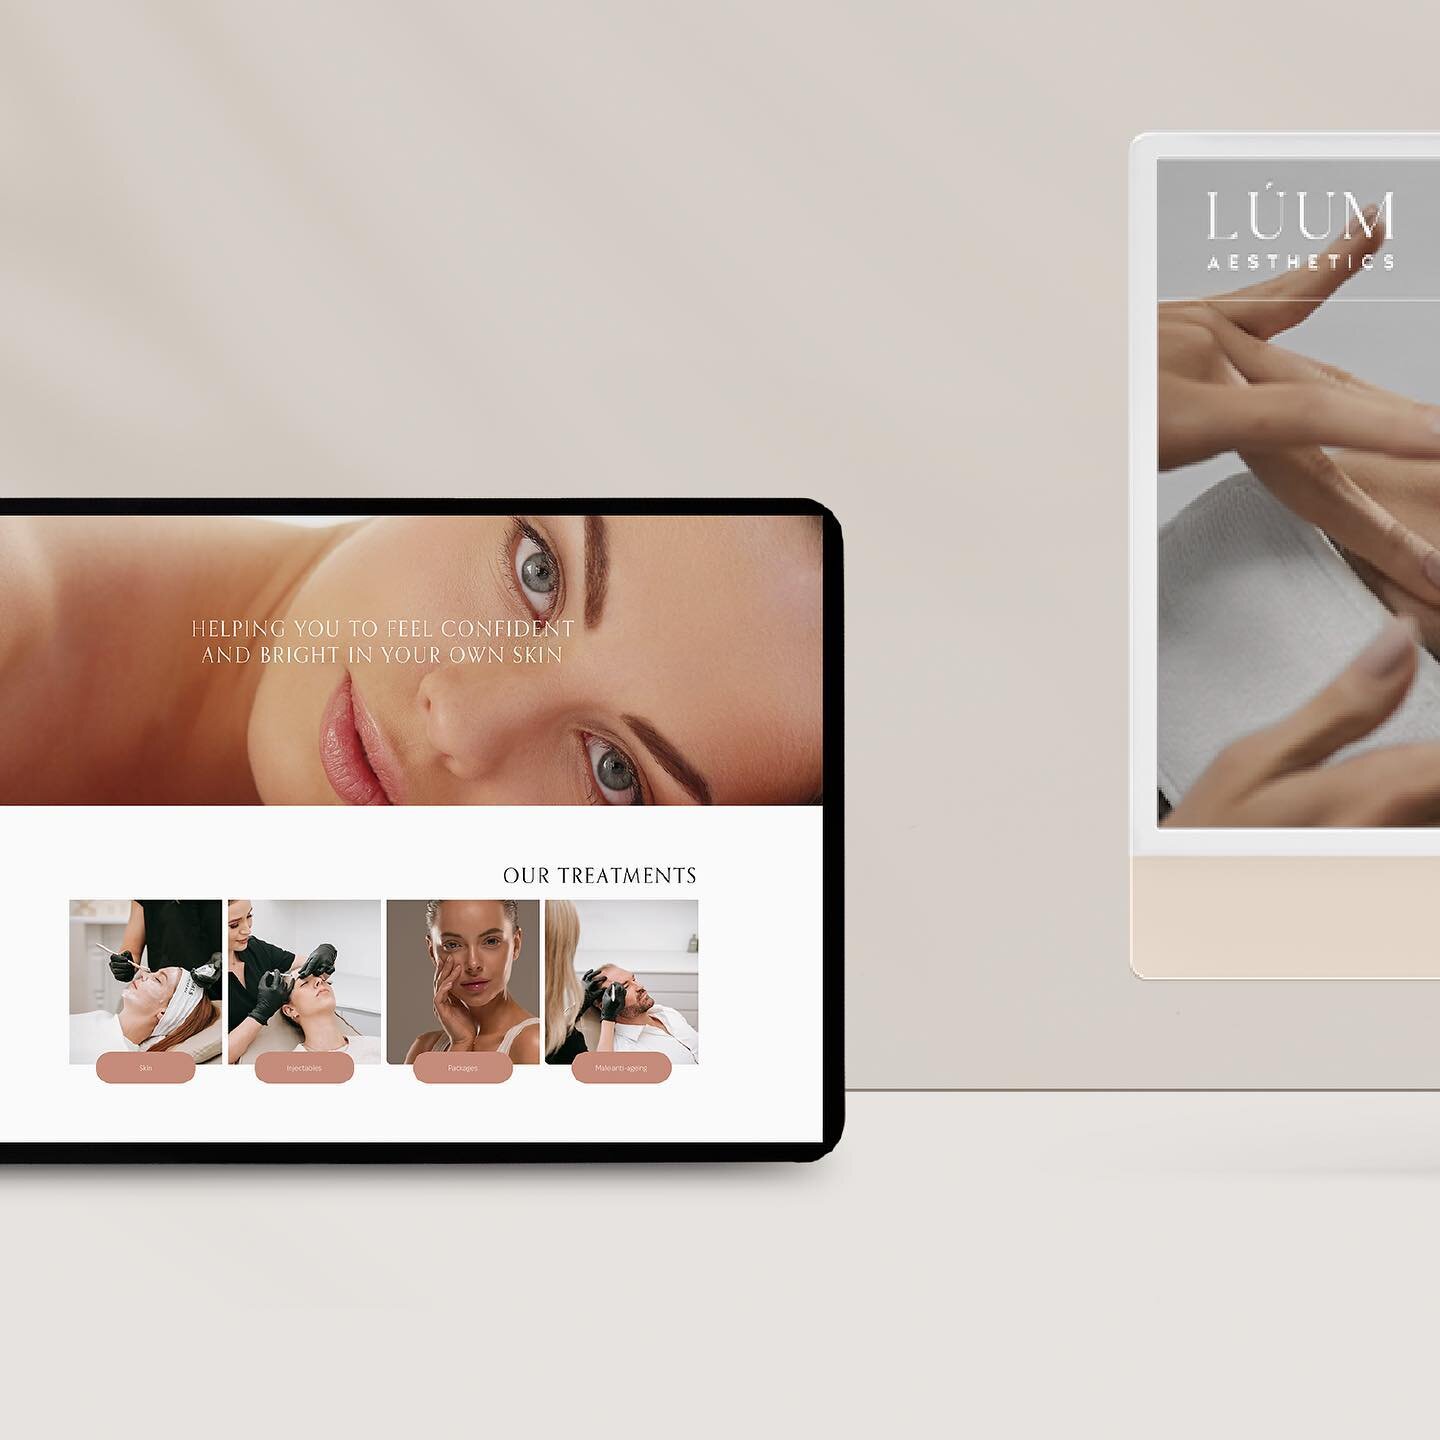 Beautiful website design created for @luumaesthetics 🖤
Loved creating this easy to function website to suit their business. 

It&rsquo;s a crazy world out there, most businesses are now online which is the best solution for your business needs. Thes